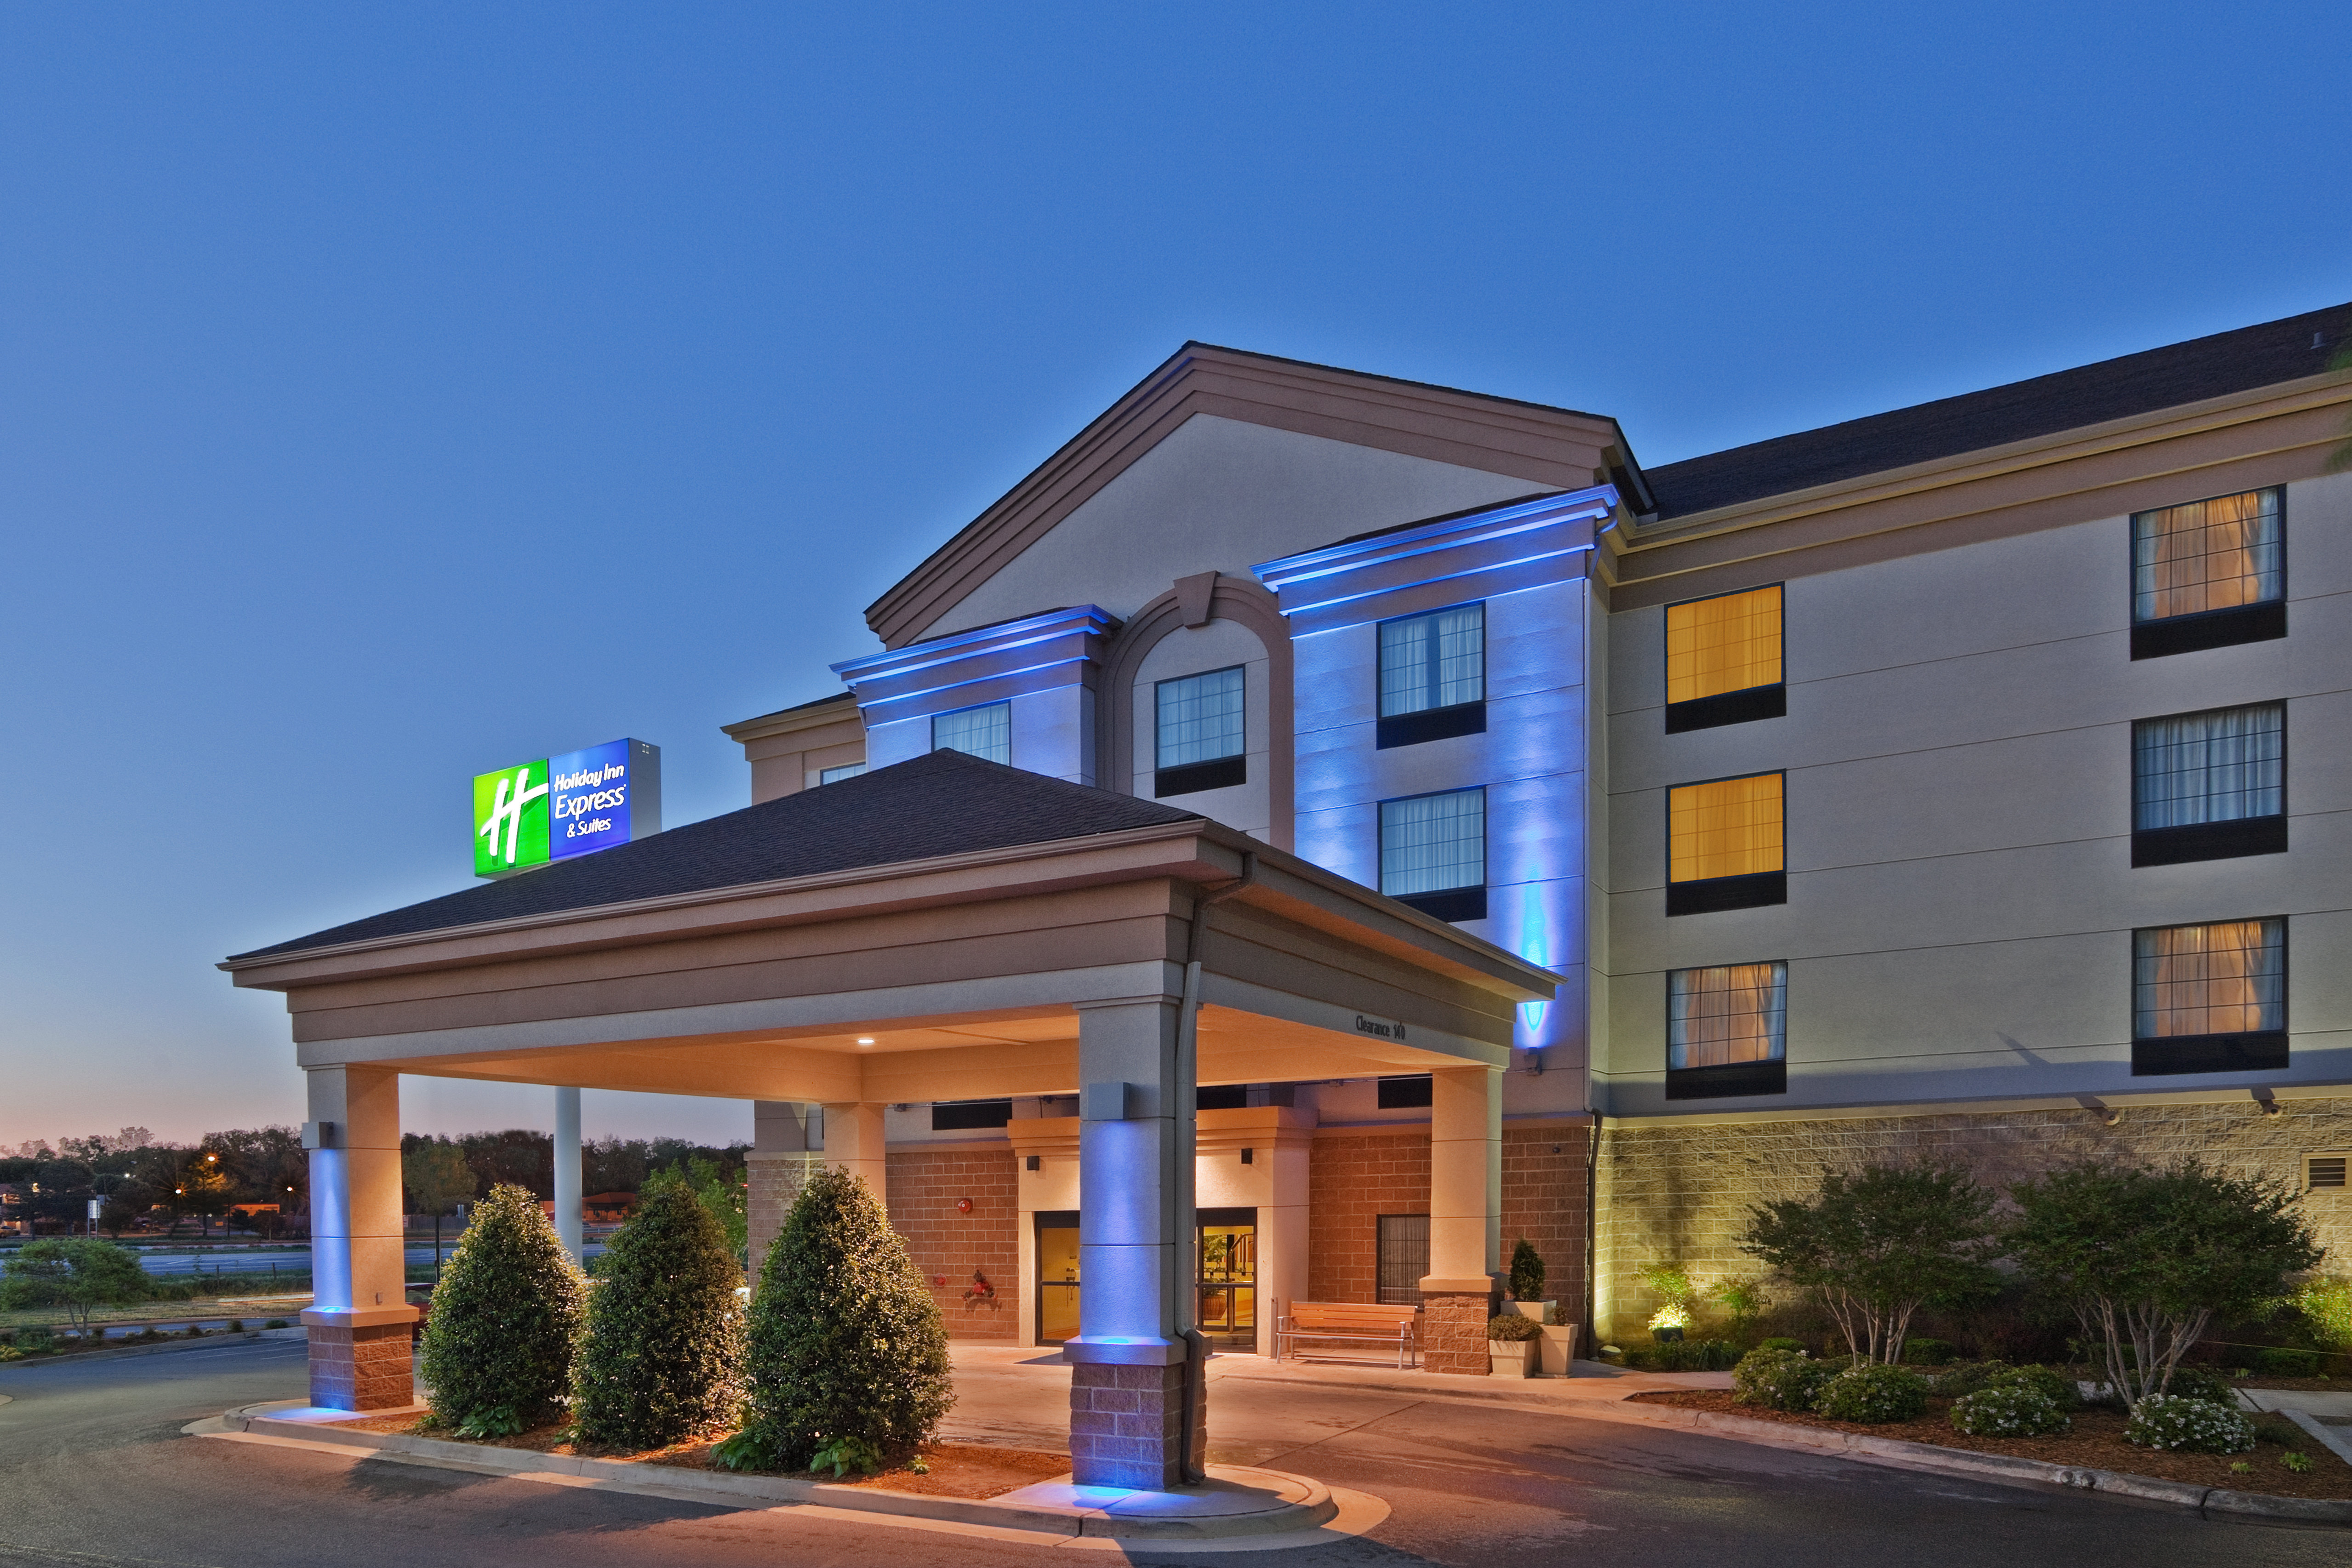 Welcome to Holiday Inn Express & Suites Lawton-Fort Sill